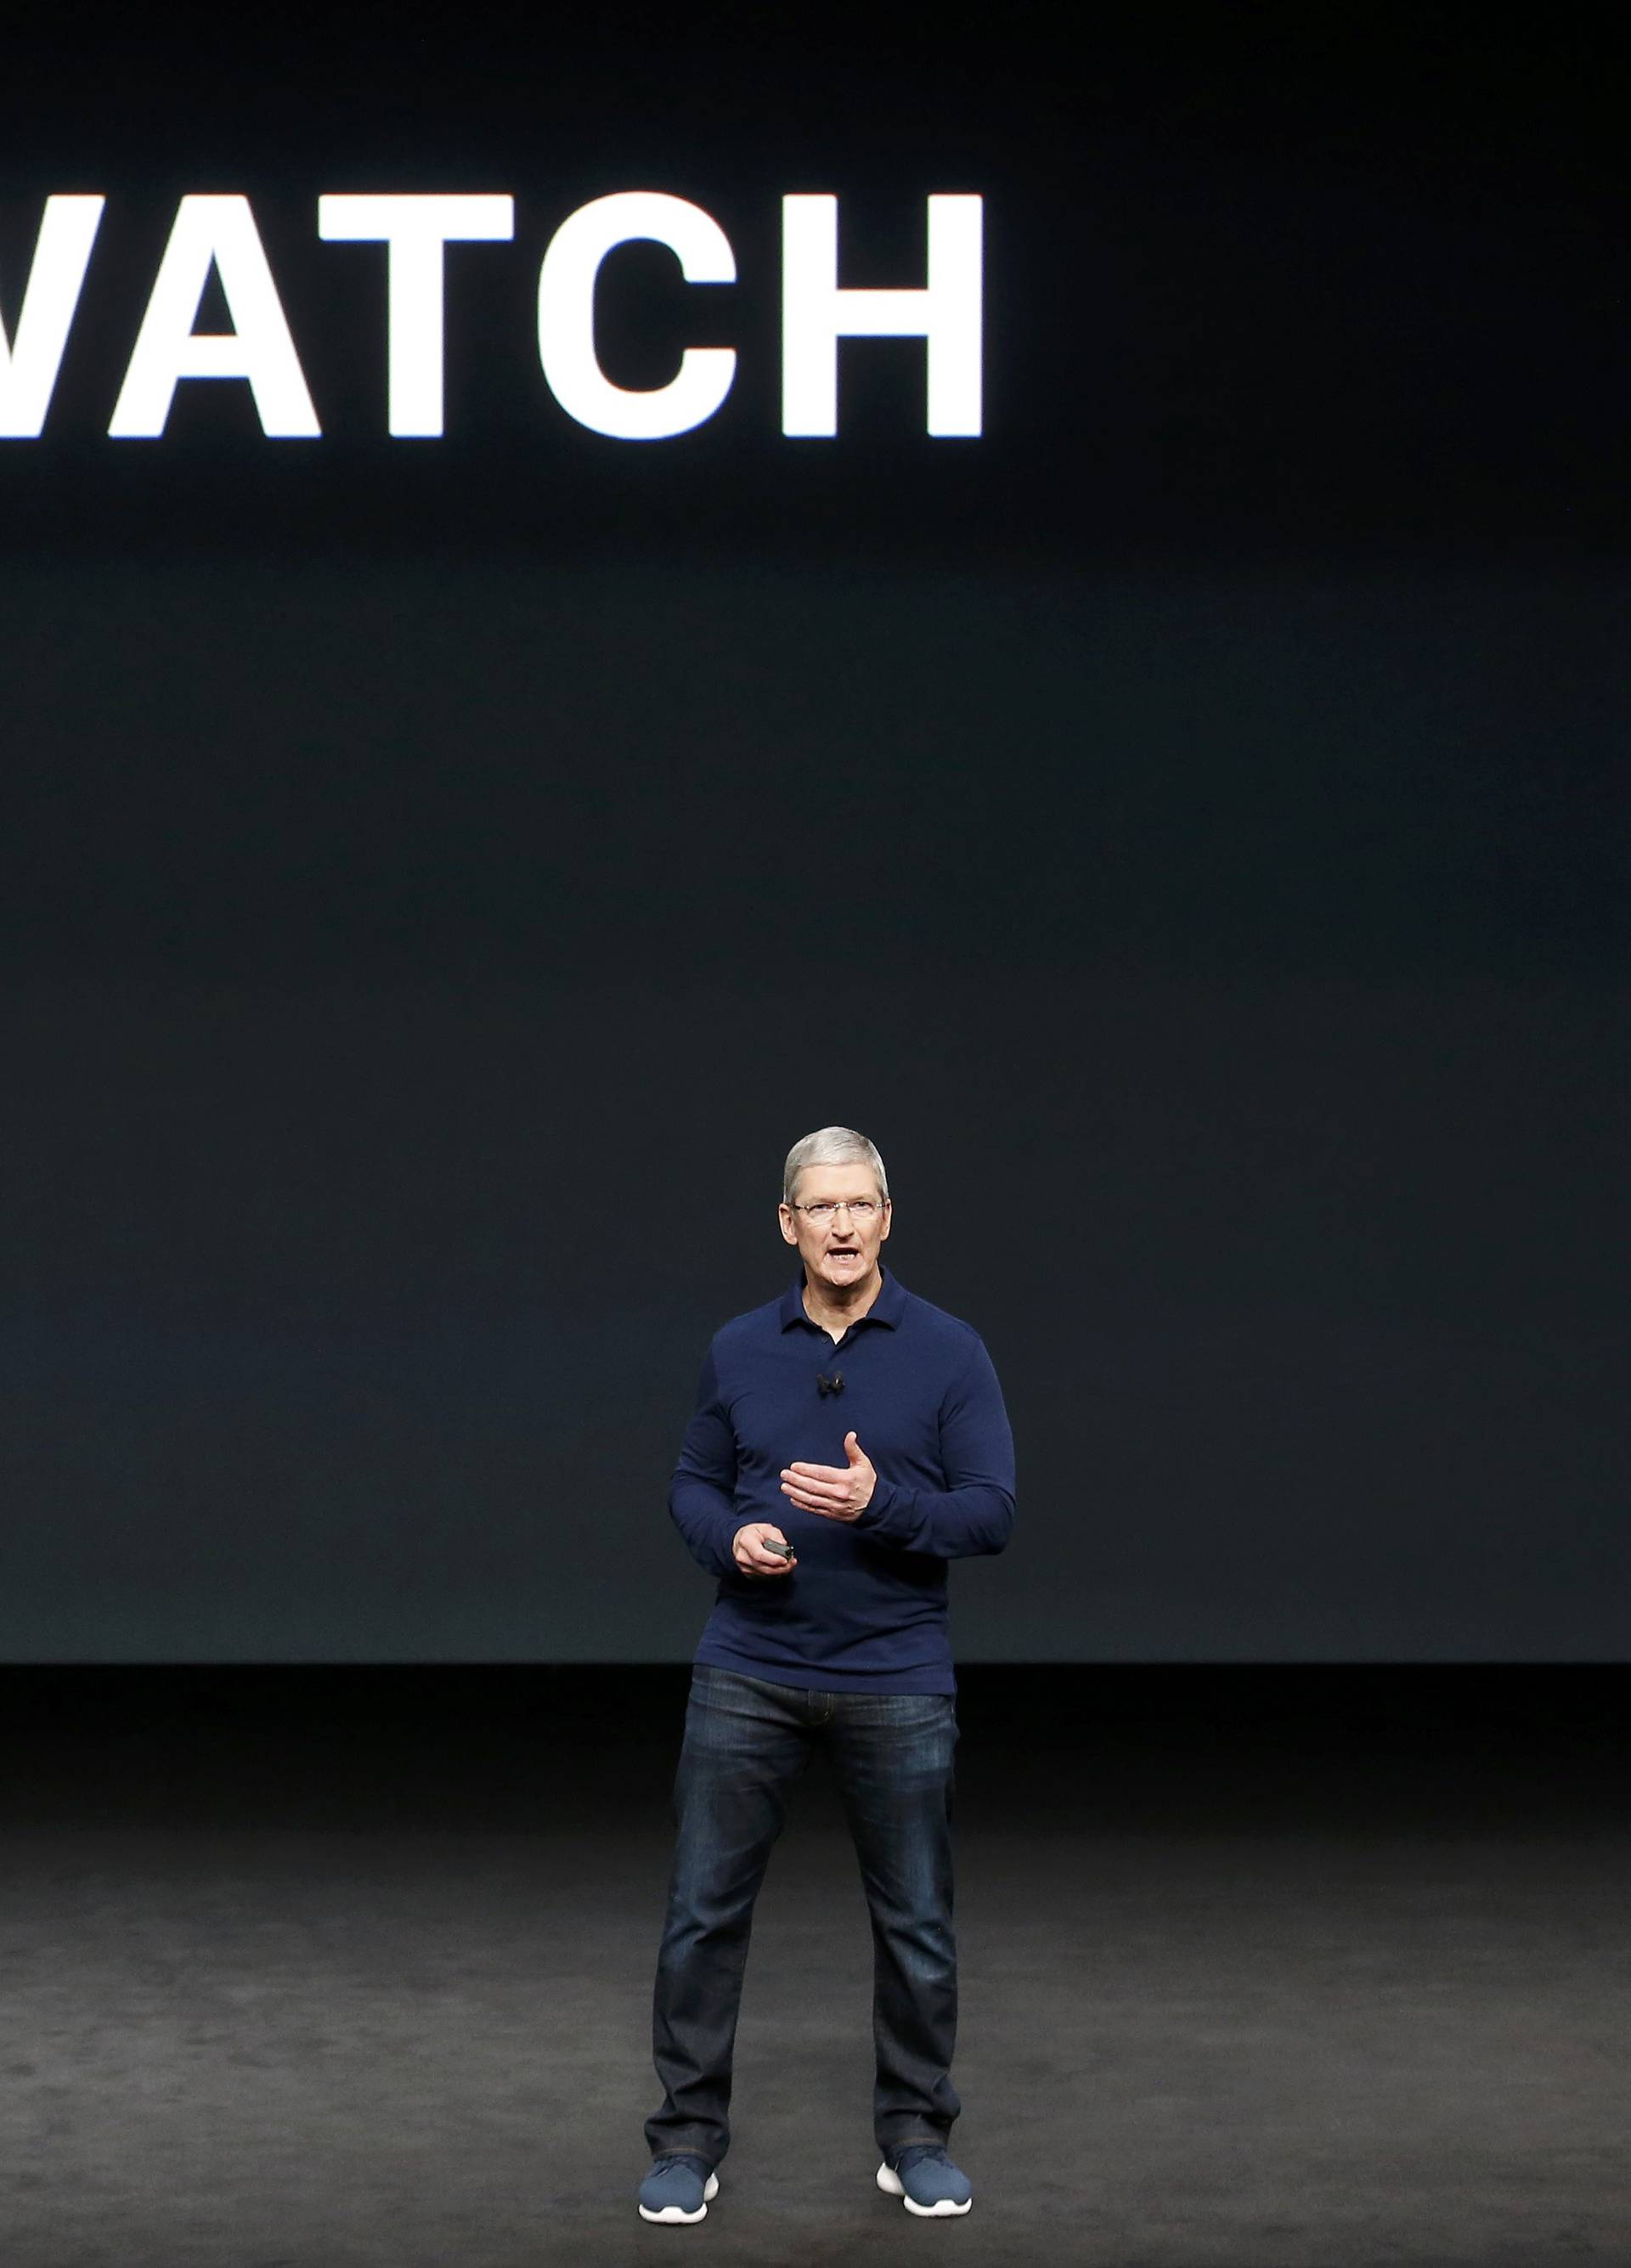 Tim Cook discusses the Apple Watch during a media event in San Francisco